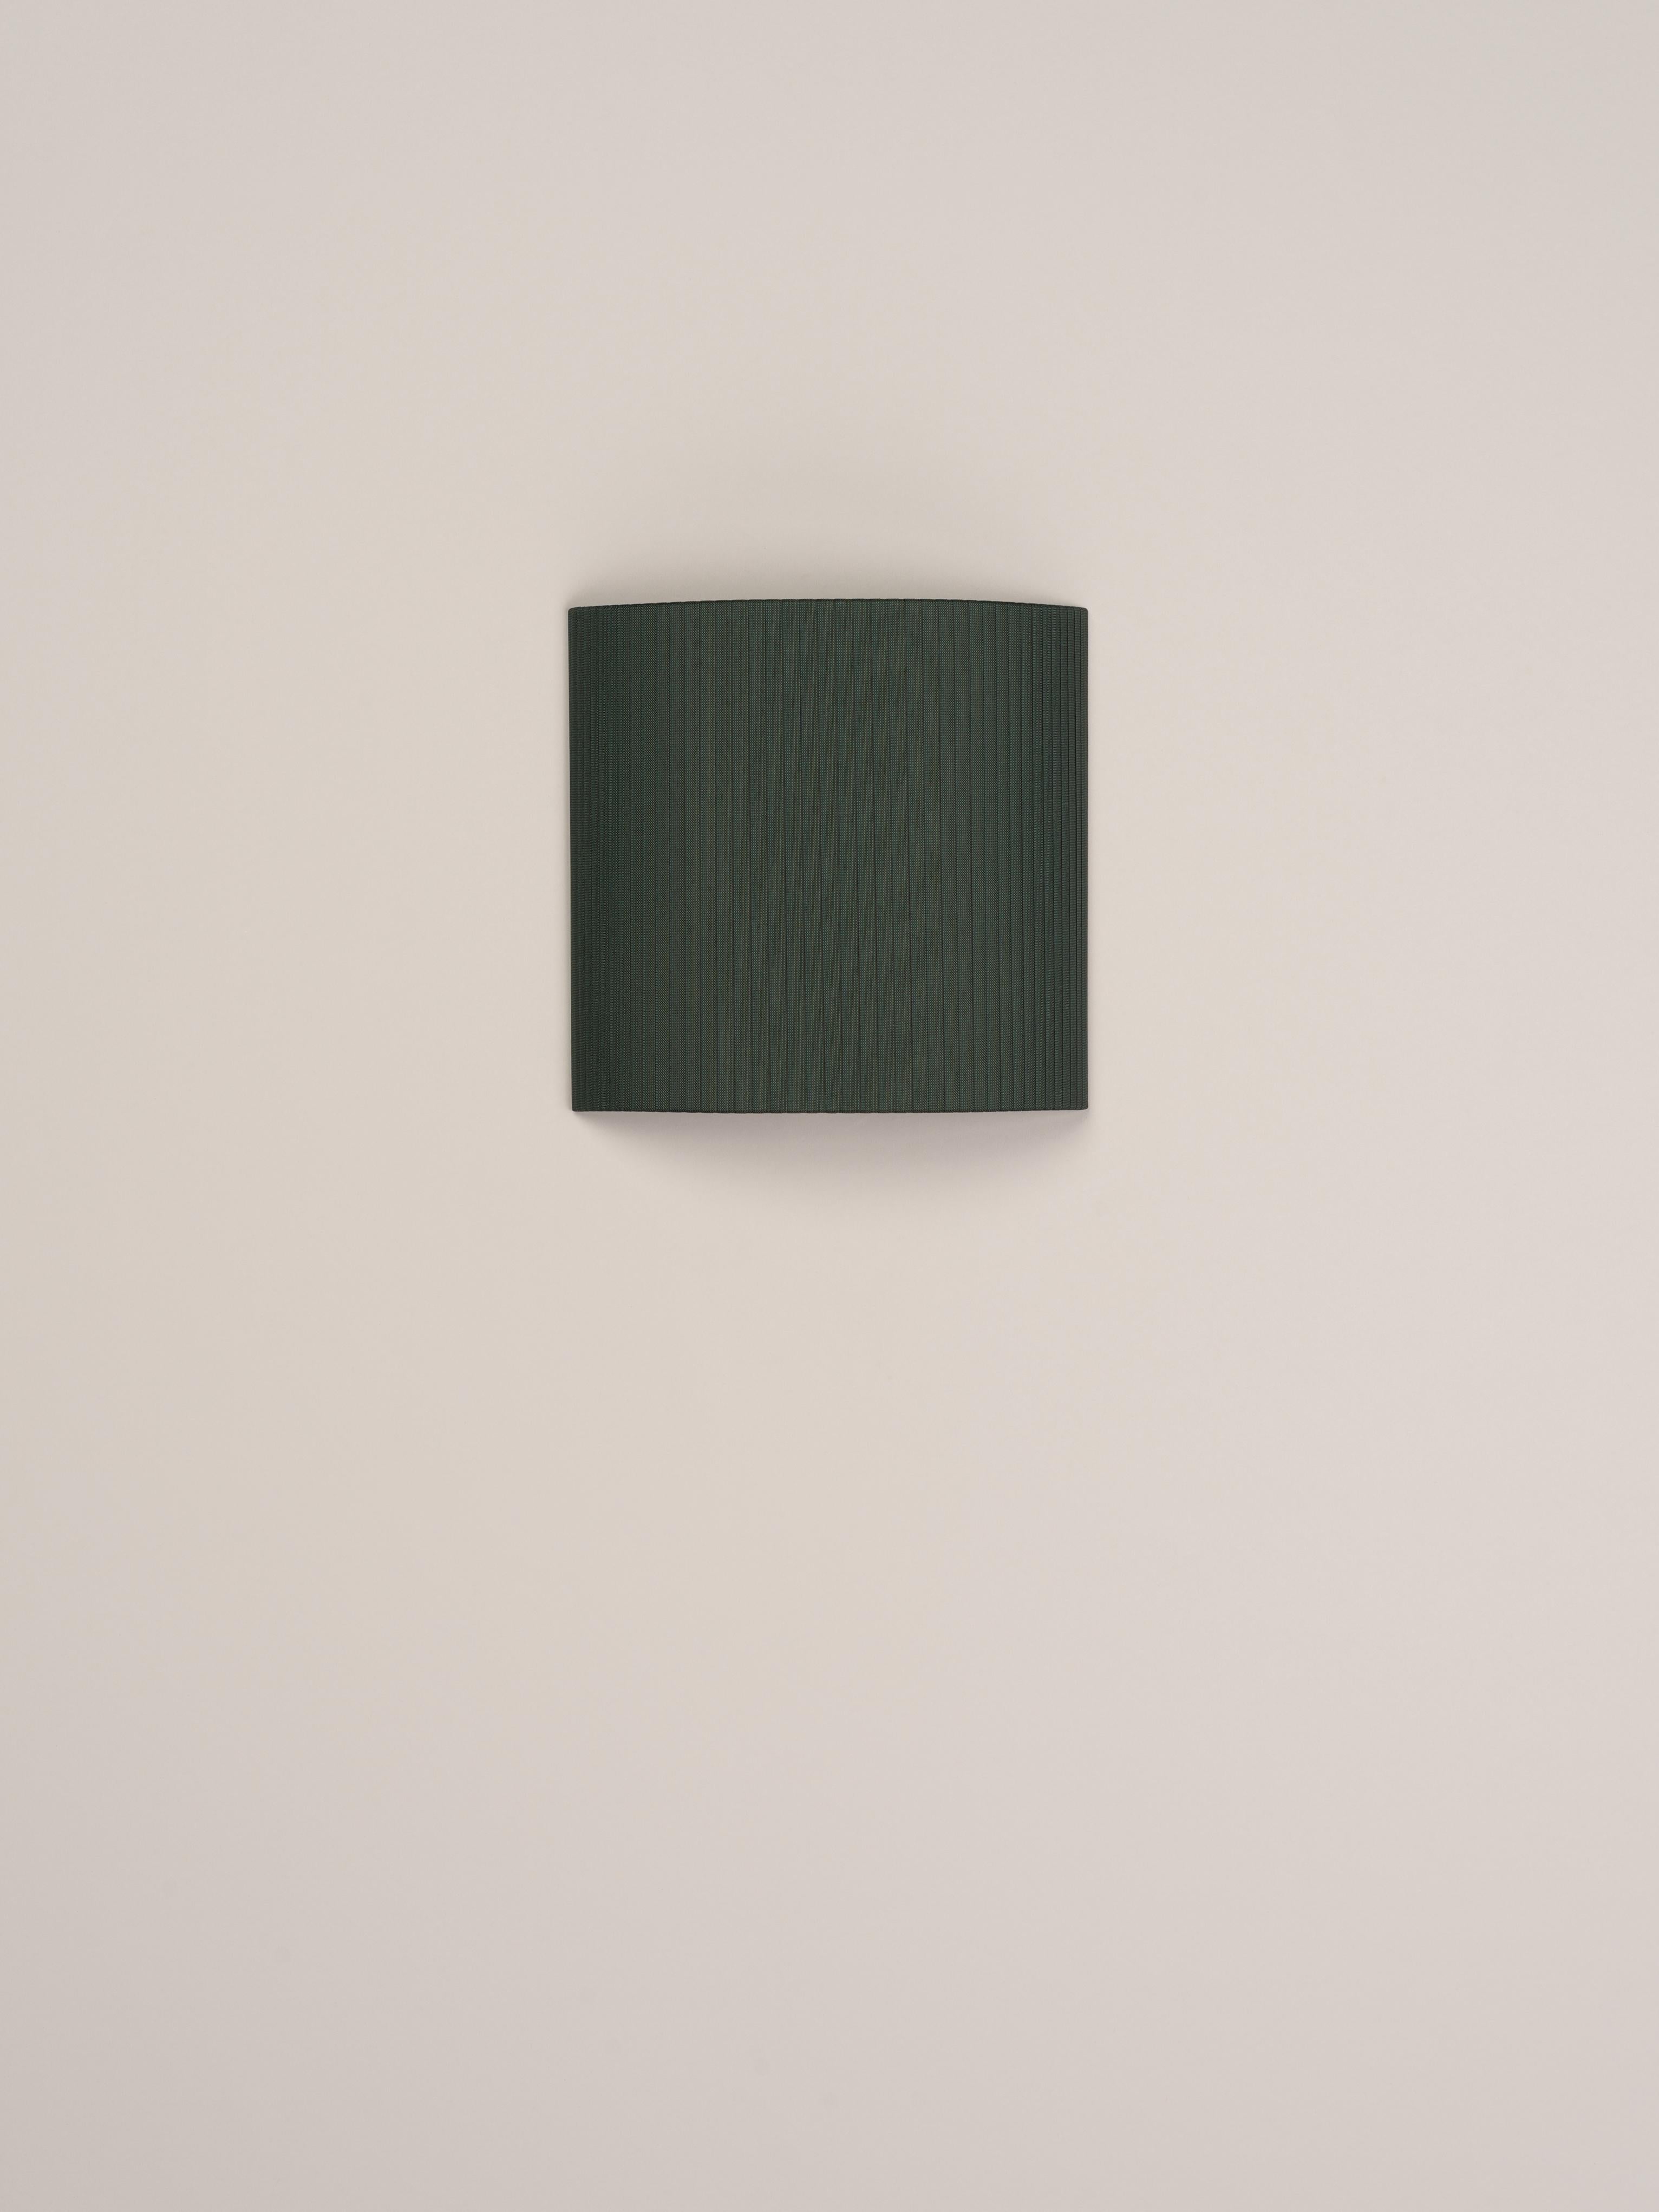 Green Comodín Cuadrado wall lamp by Santa & Cole
Dimensions: D 31 x W 13 x H 30 cm
Materials: Metal, ribbon.

This minimalist wall lamp humanises neutral spaces with its colourful and functional sobriety. The shade is fondly hand-ribboned, piece